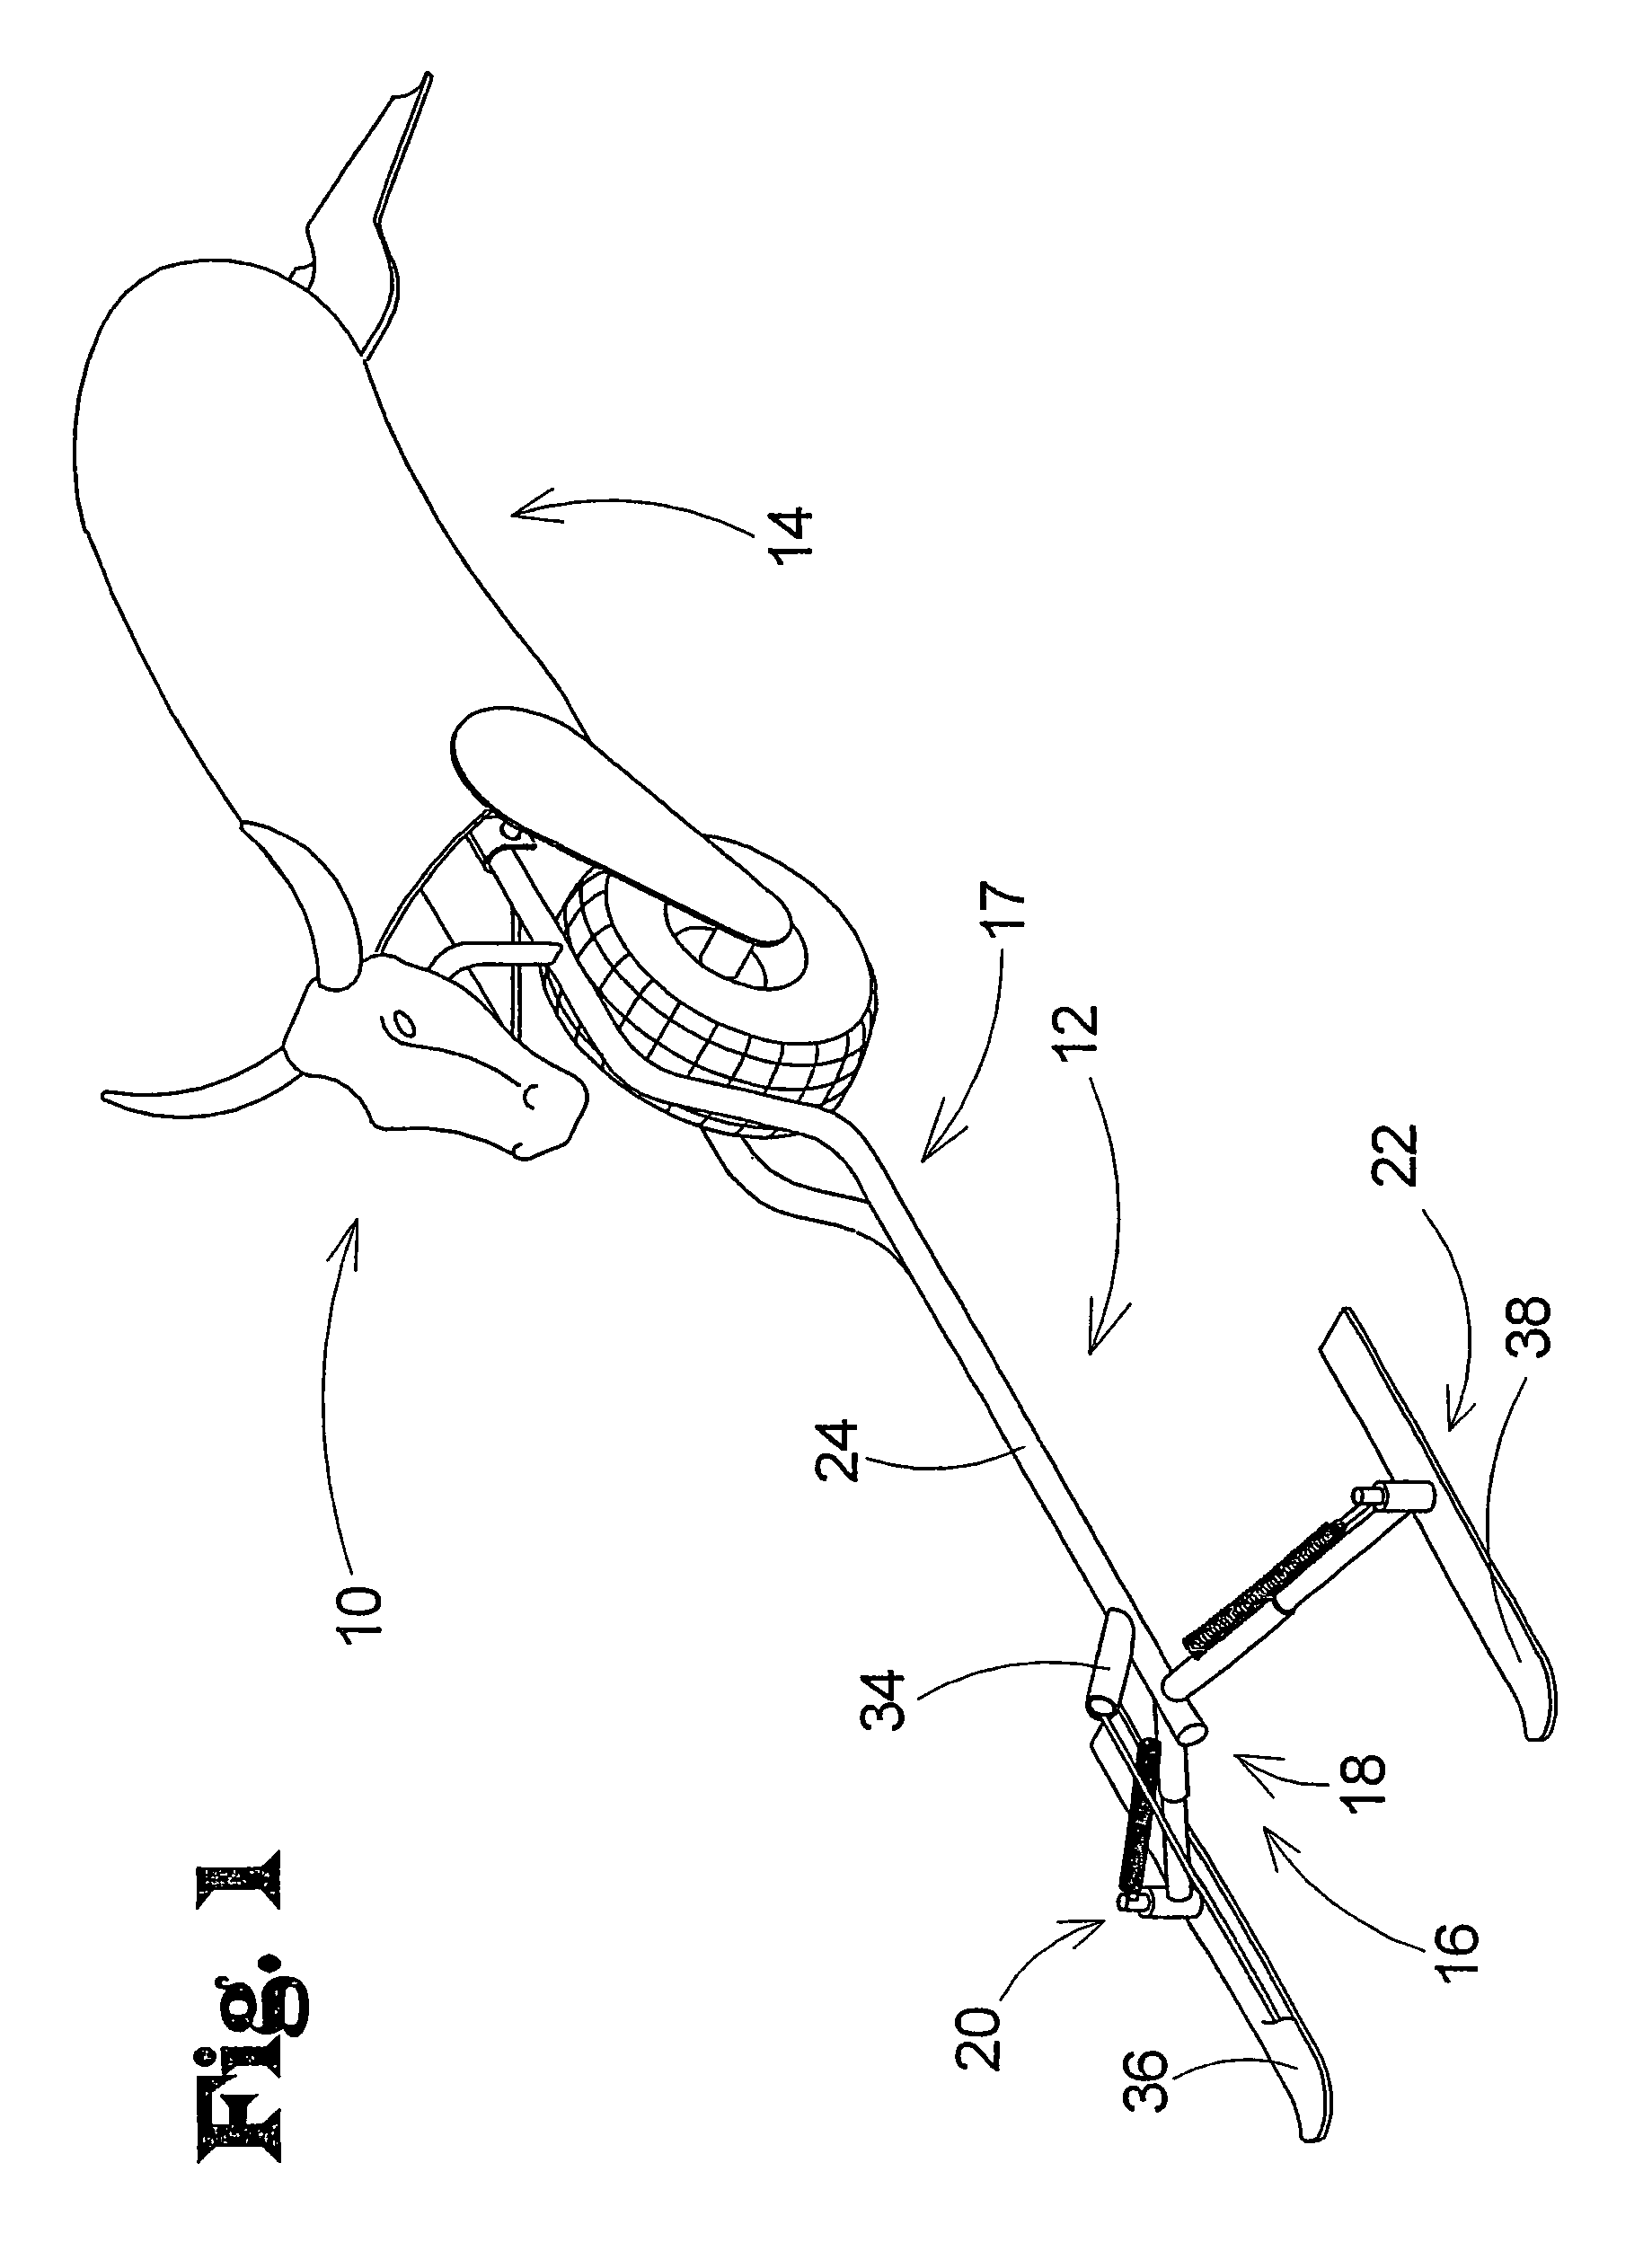 Mechanical roping steer apparatus with pivoting horns and pivoting horn support